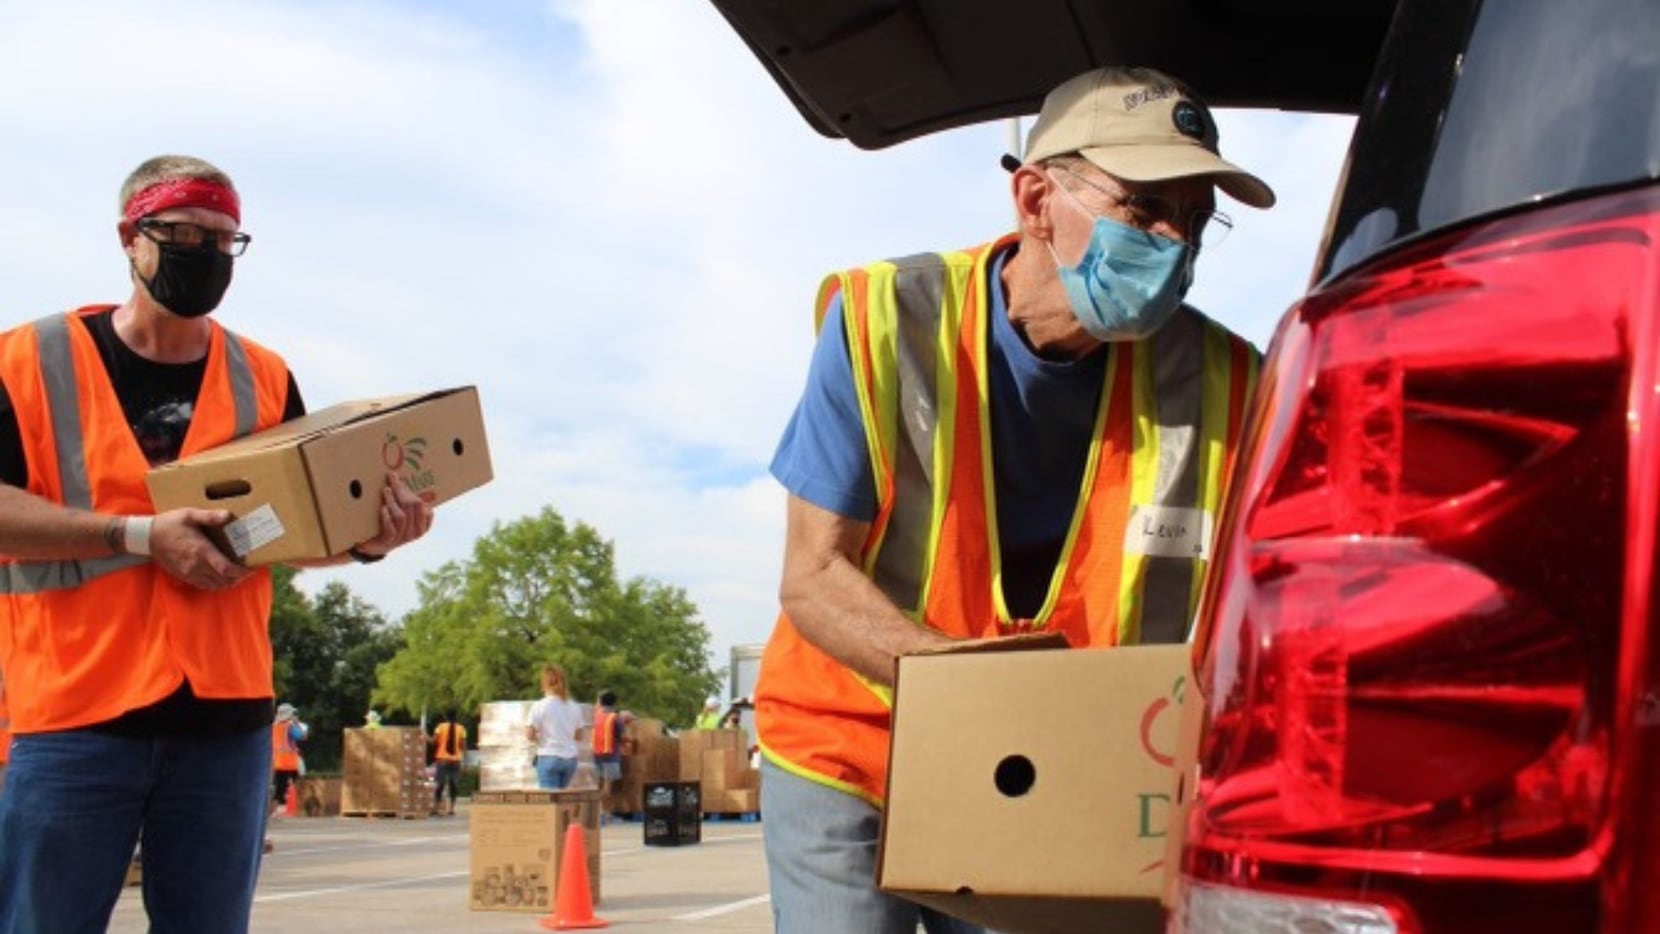 Two masked volunteers load boxes into the trunk of a car as part of Nourish North Texas.